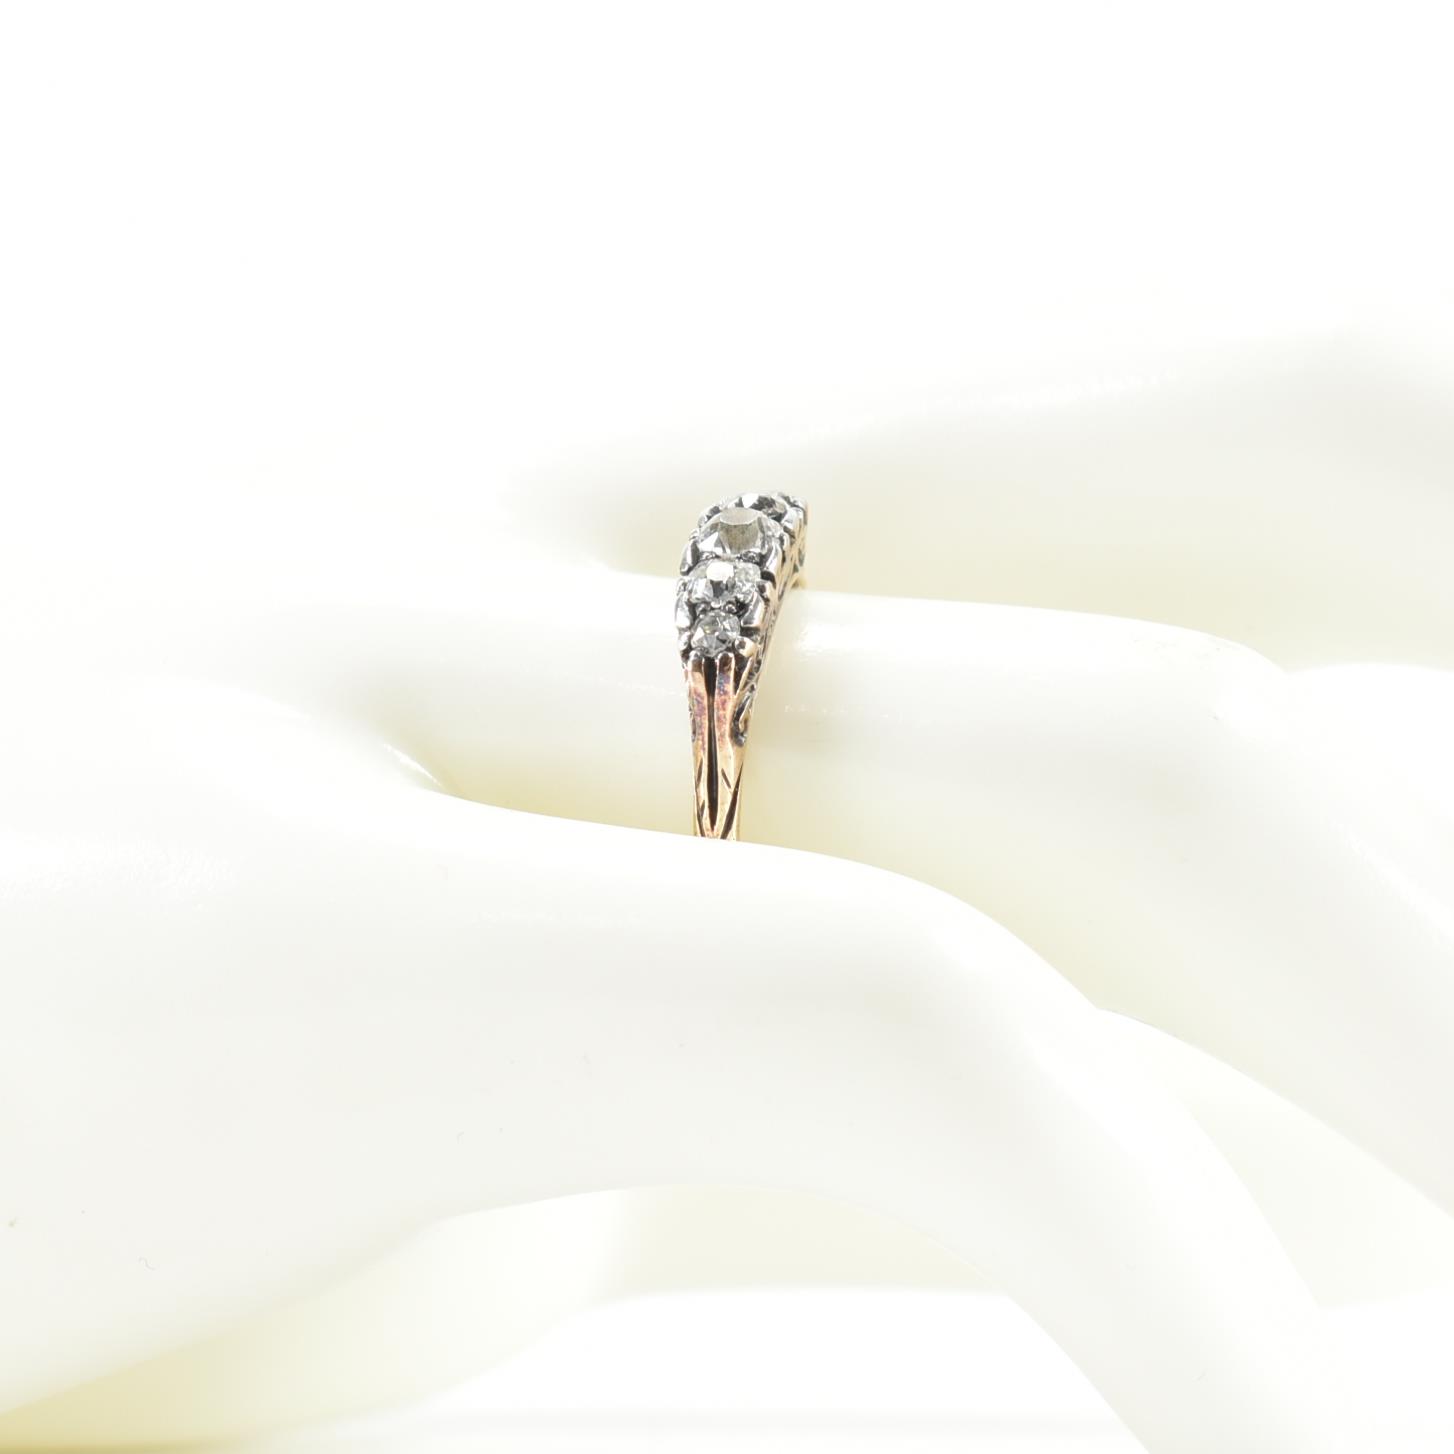 18CT GOLD FIVE STONE DIAMOND RING - Image 8 of 9